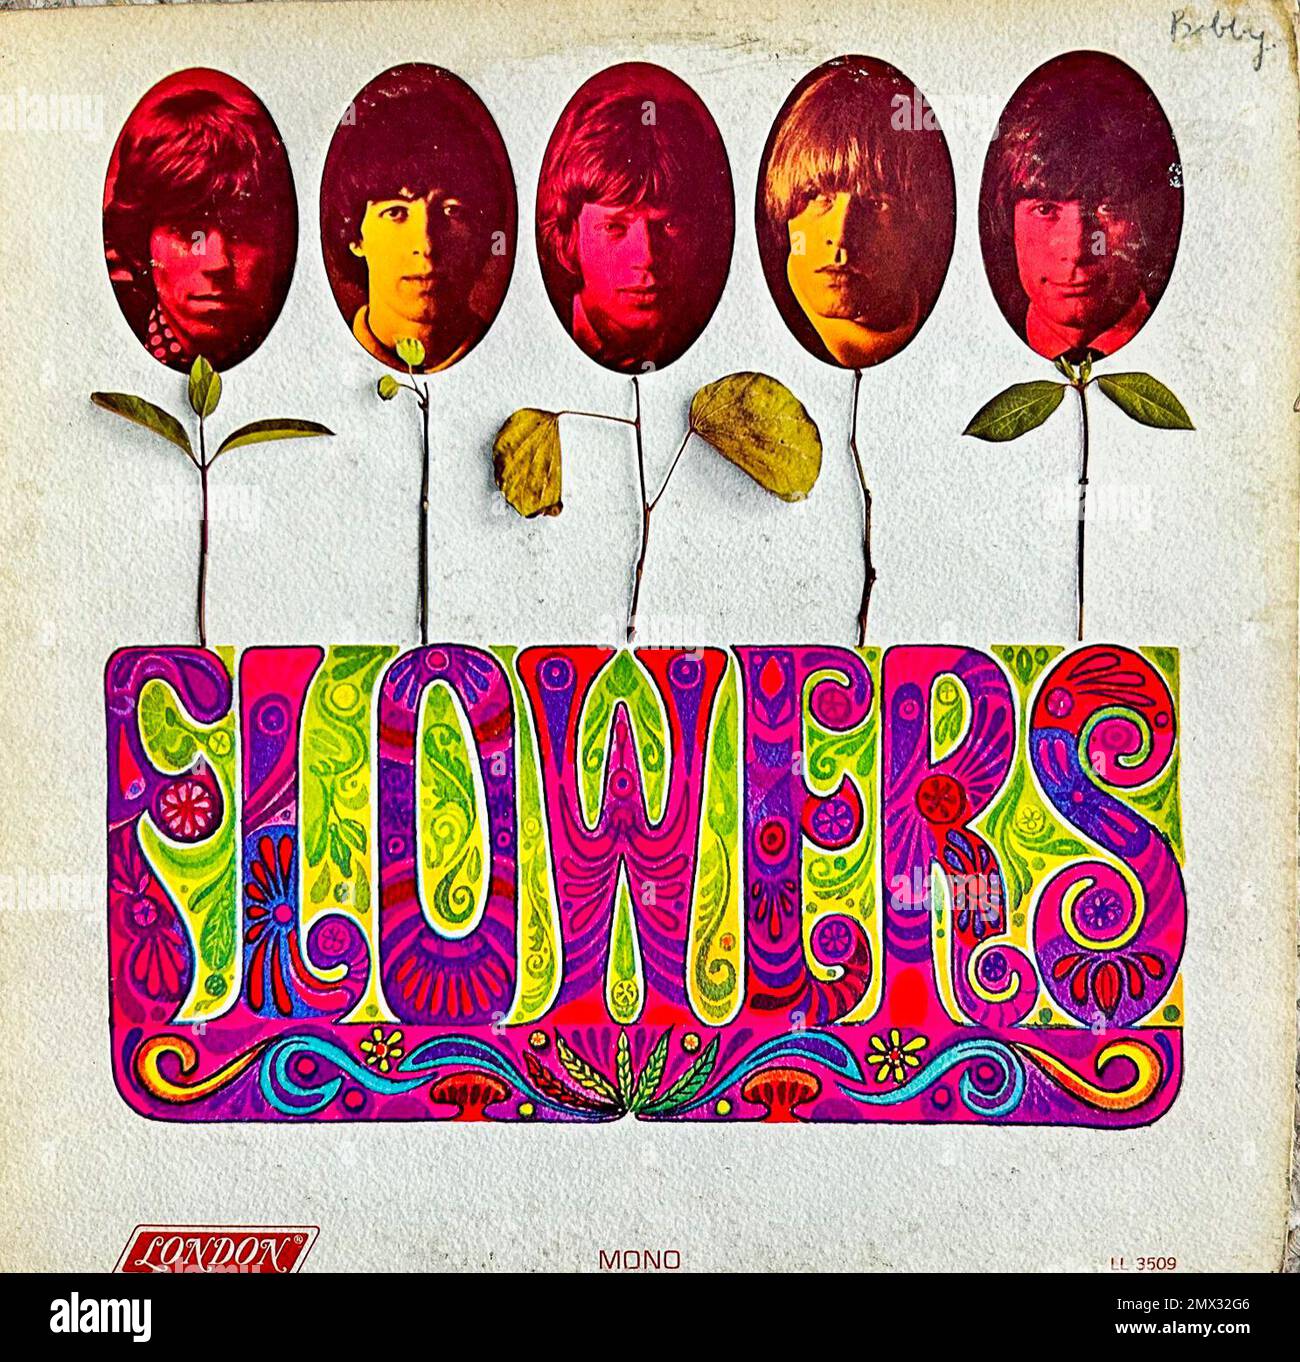 Close up Objects, The Rolling Stones, VIntage Vinyl LP Record Album Art Cover, 'Flowers' 1967, Classic rock Stock Photo